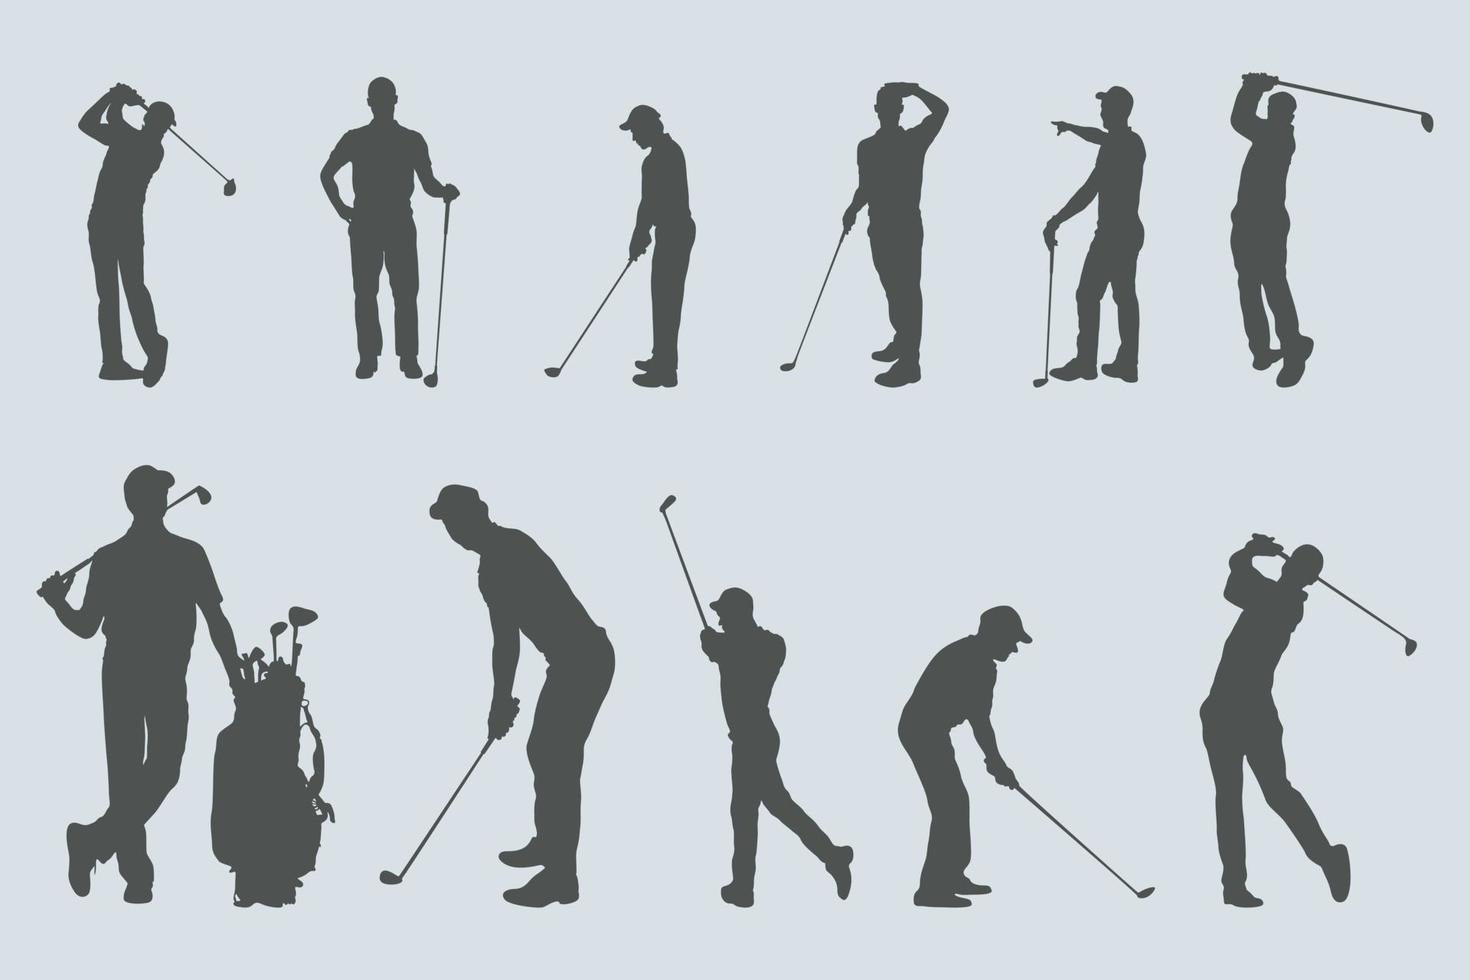 Golf player silhouettes, Golf player playing silhouettes vector